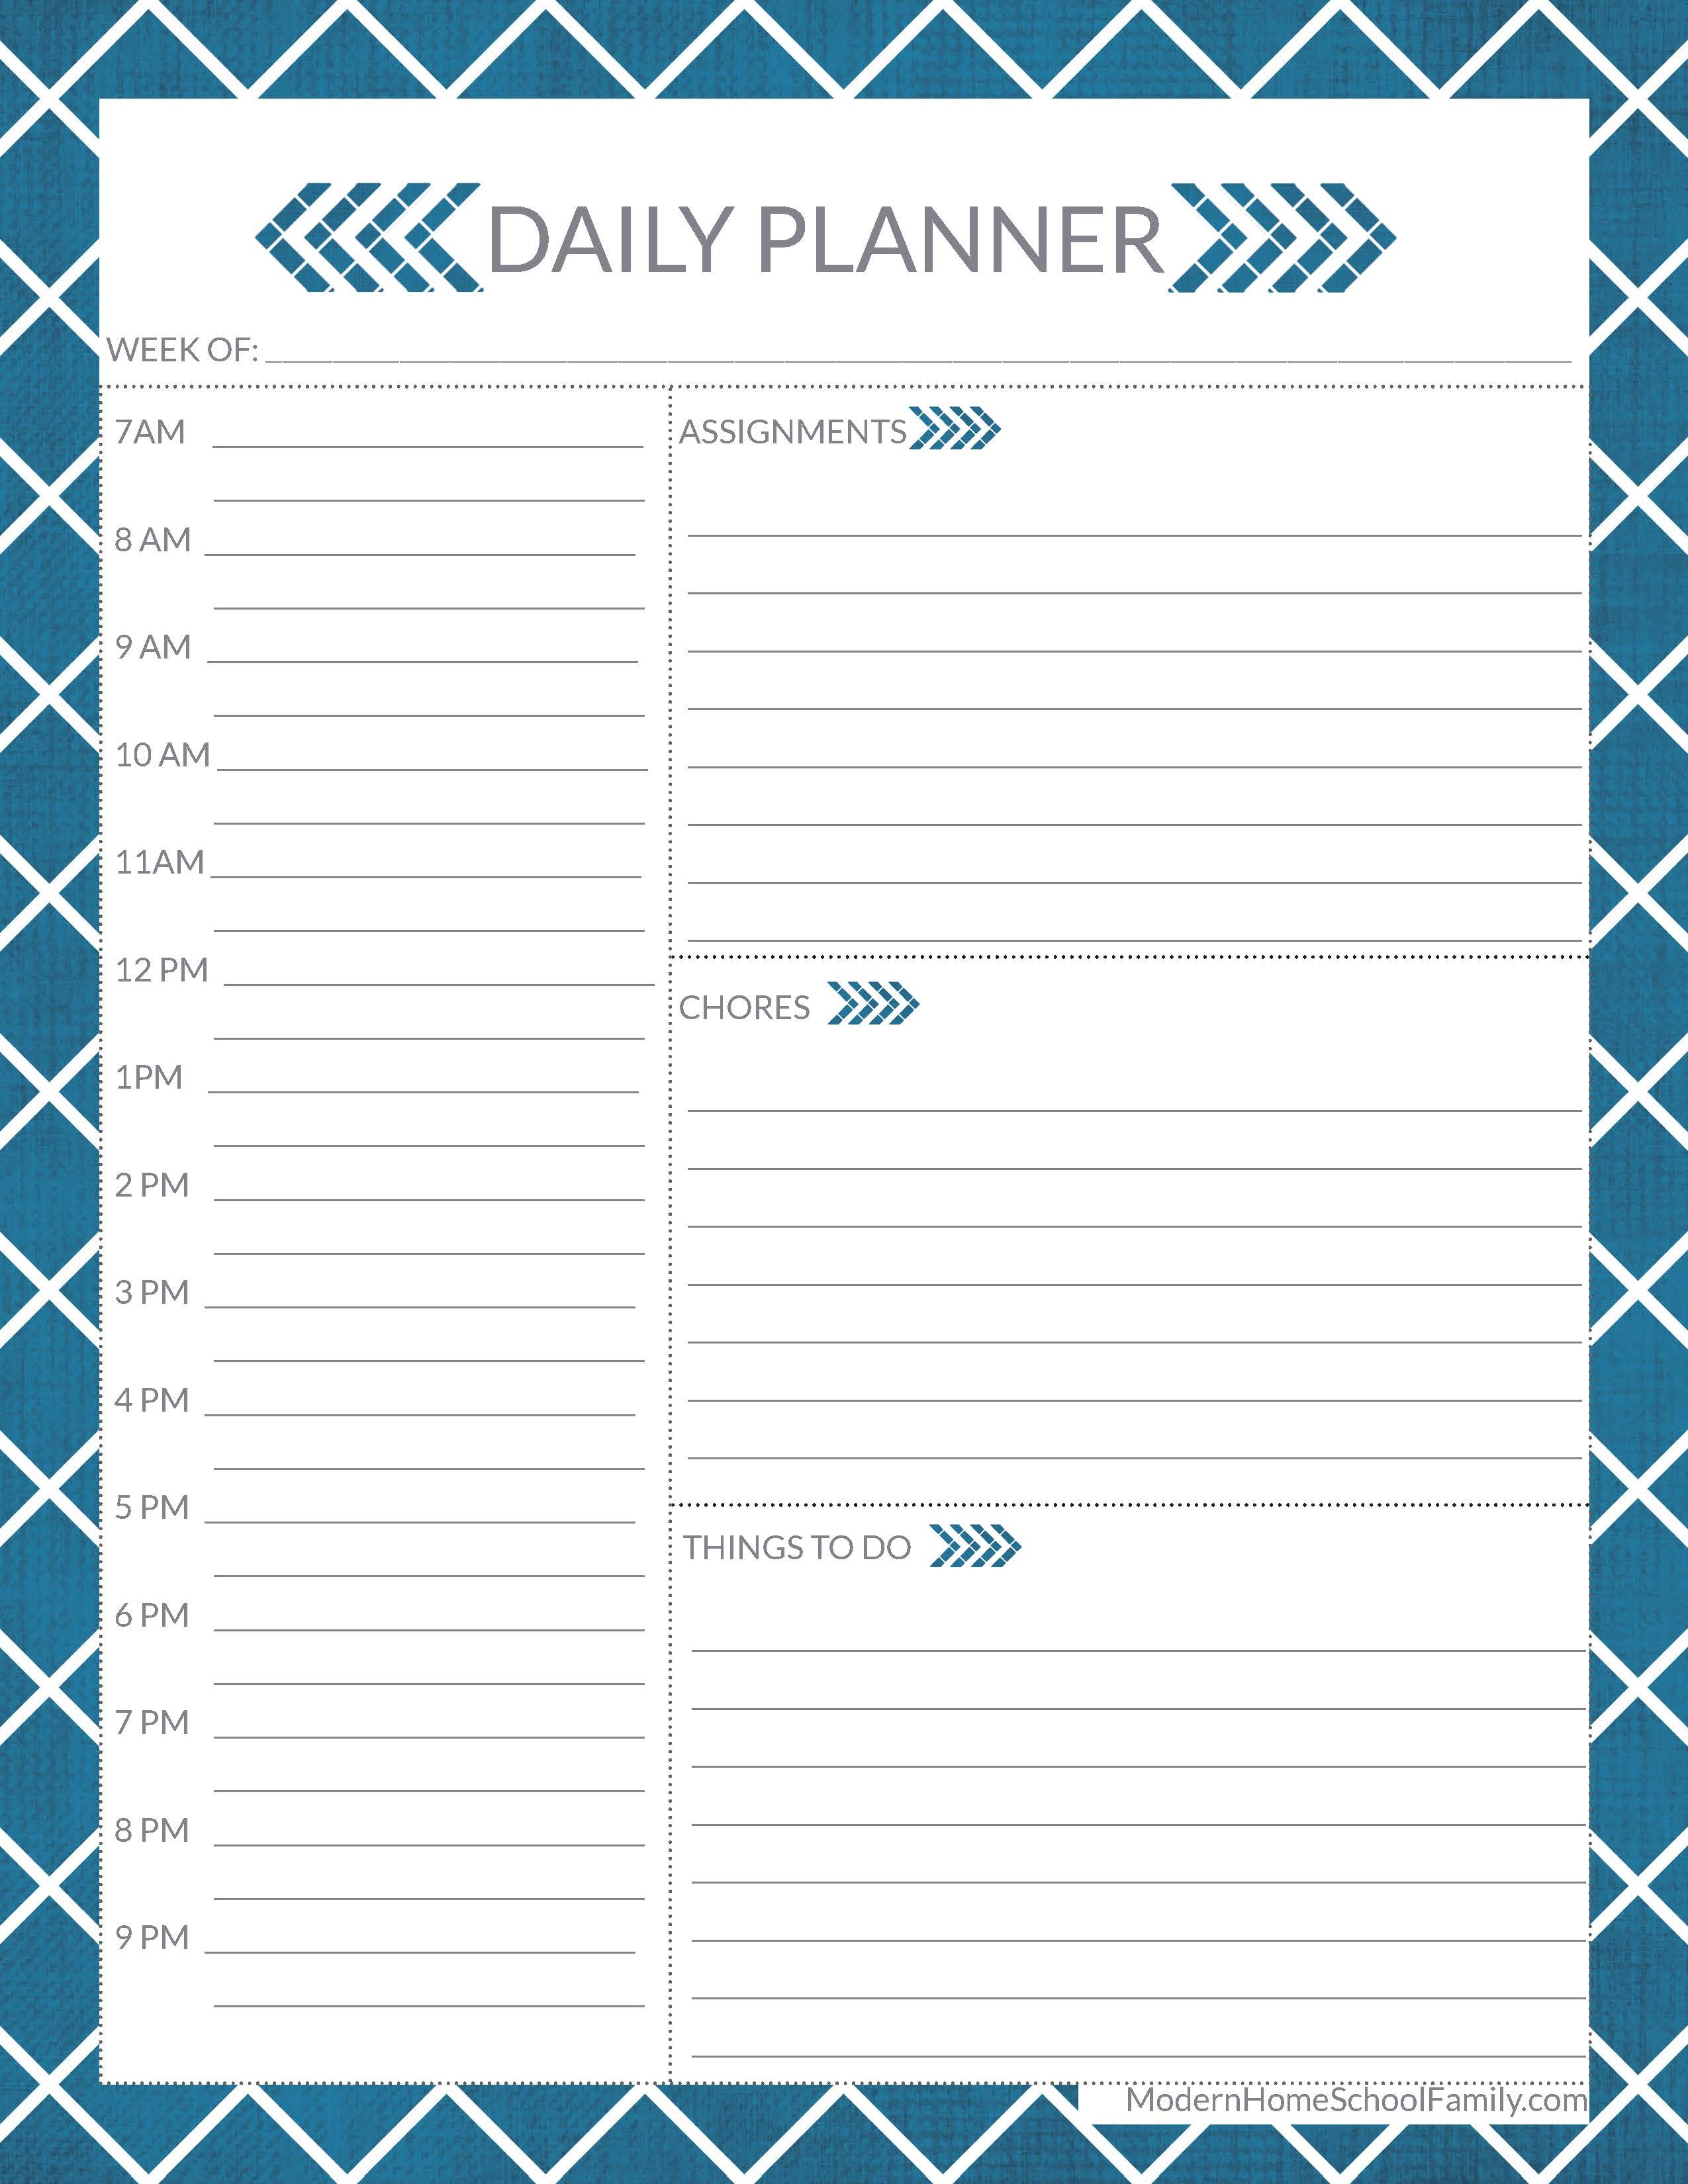 Free Homeschool Planner For High School Page - Modern Homeschool Family - Free Printable High School Worksheets